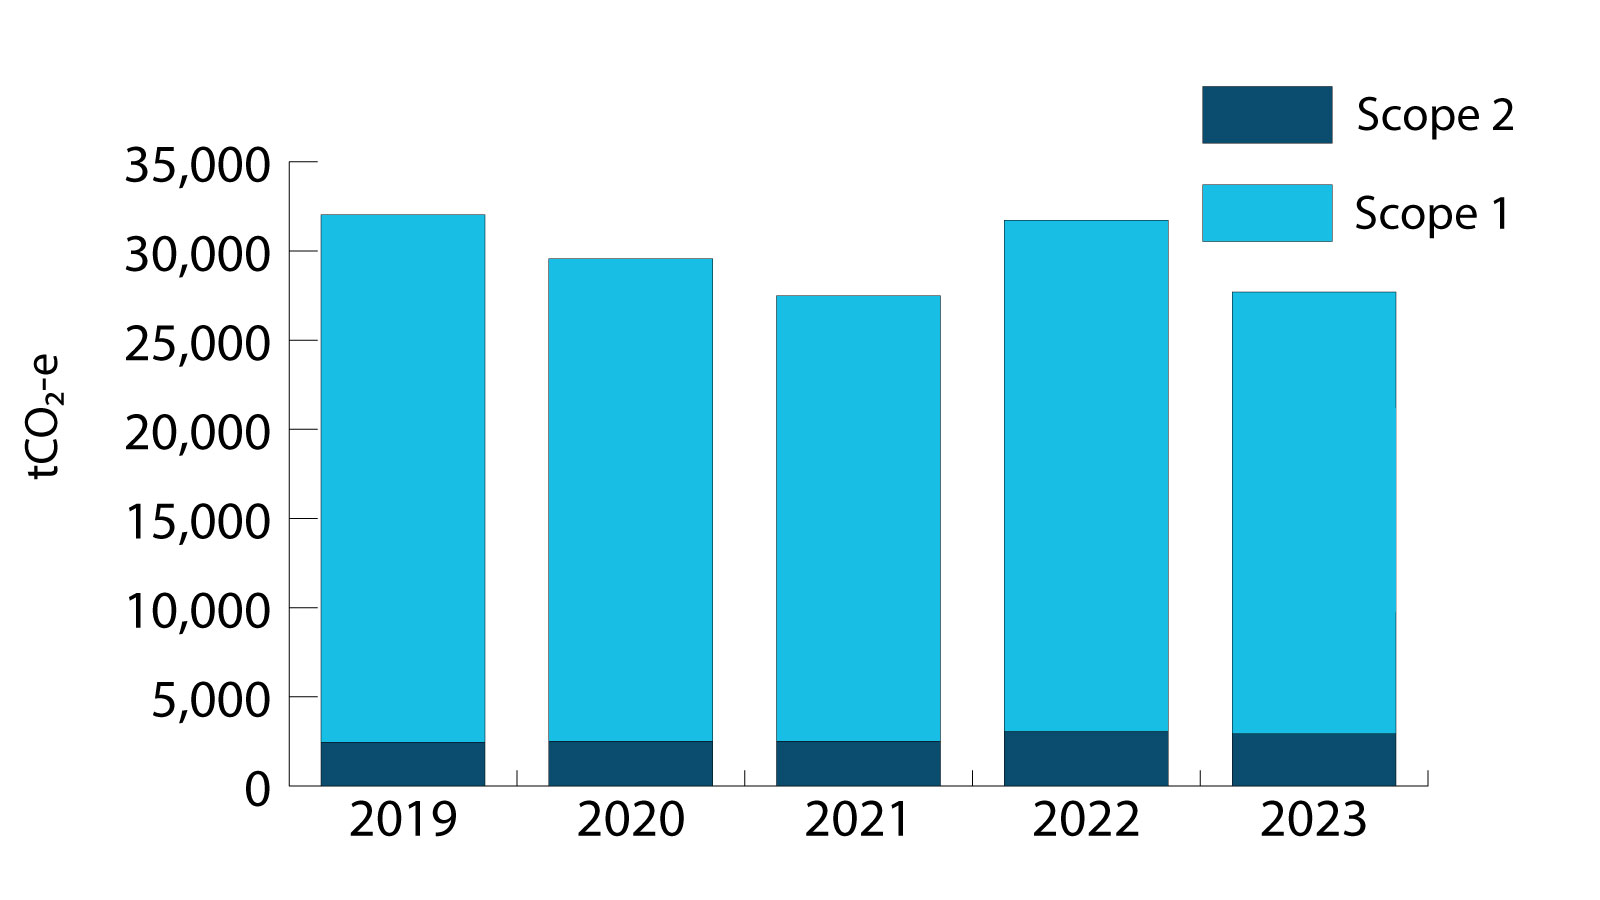 Yearly greenhouse gas emissions  for scope 1 and 2 for 2019 to 2023